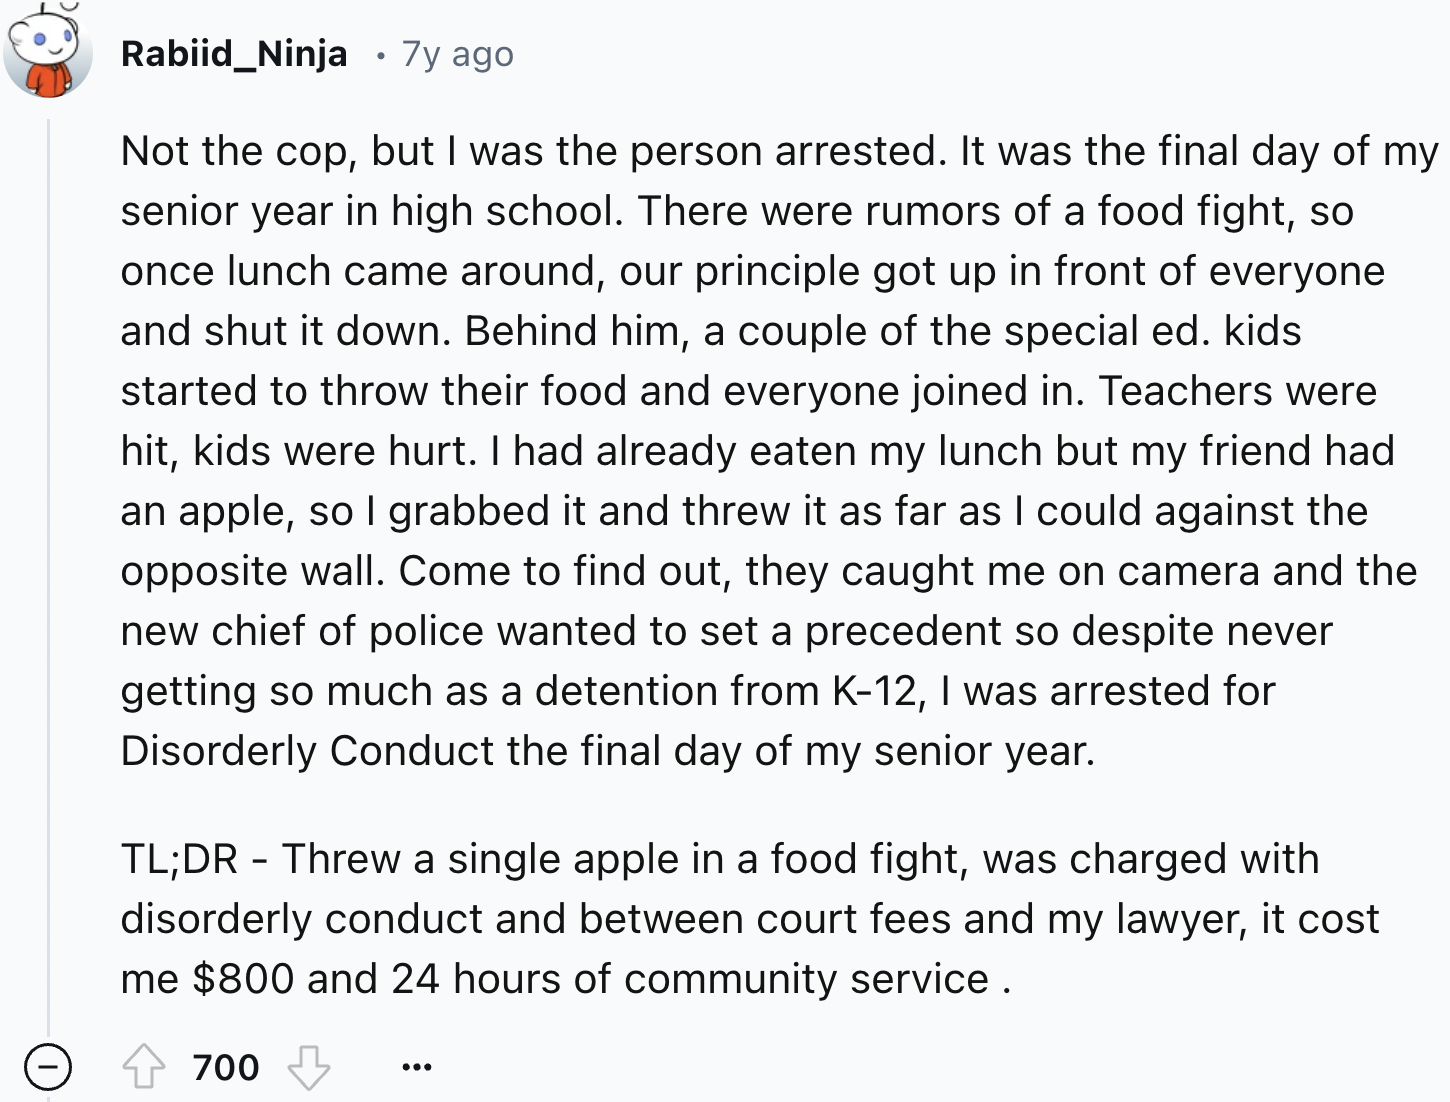 document - Rabiid_Ninja 7y ago Not the cop, but I was the person arrested. It was the final day of my senior year in high school. There were rumors of a food fight, so once lunch came around, our principle got up in front of everyone and shut it down. Beh